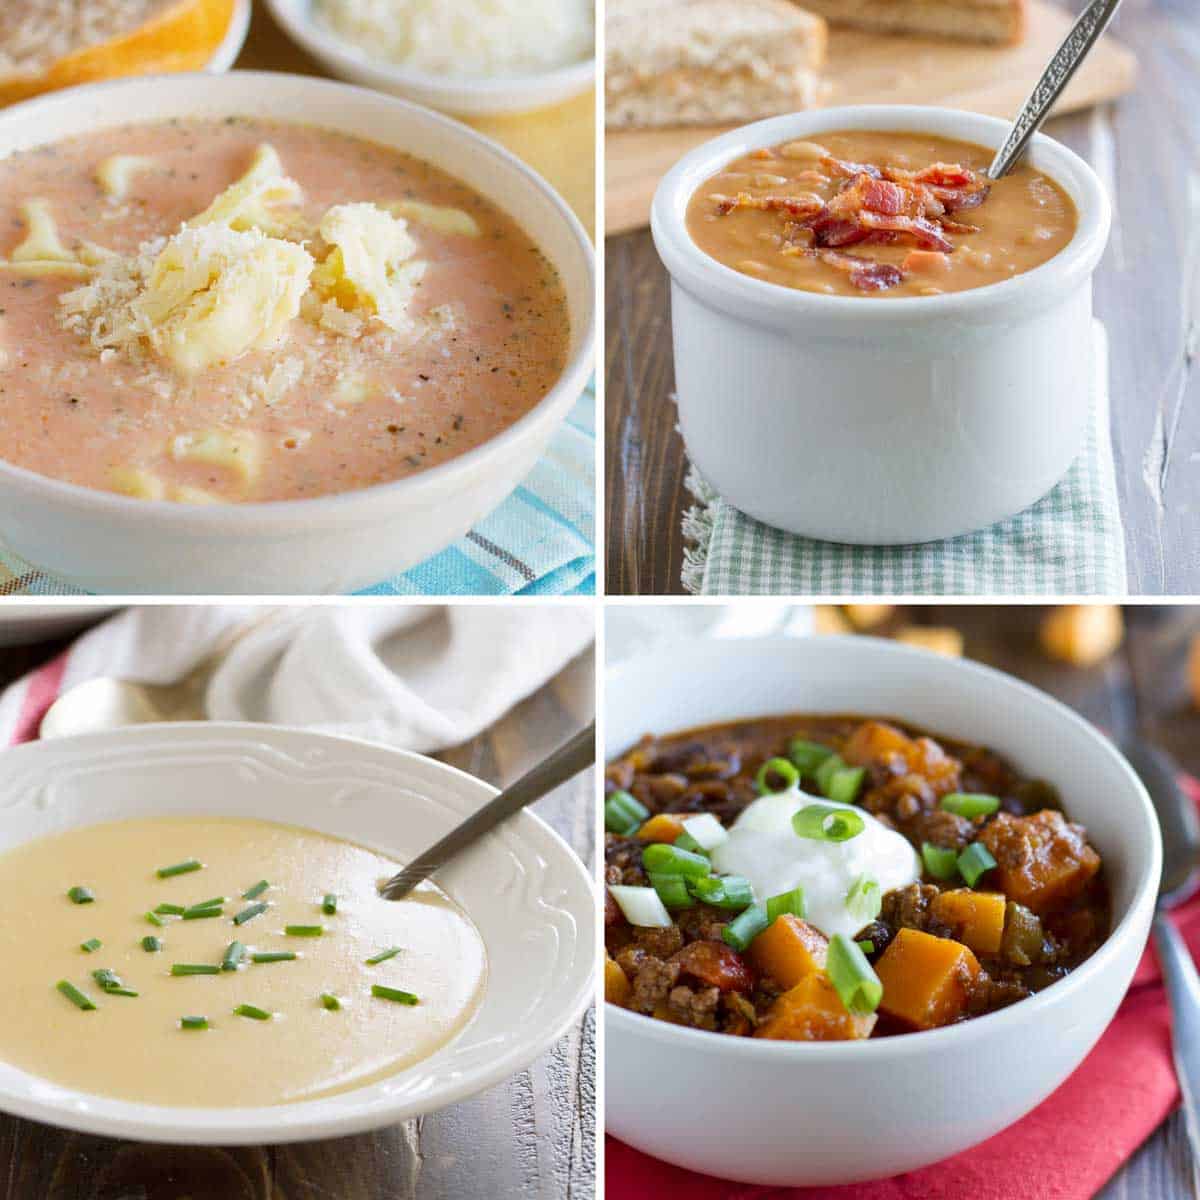 Photos of tomato tortellini soup, bean and bacon soup, cheddar cheese soup, and butternut squash chili with beef.